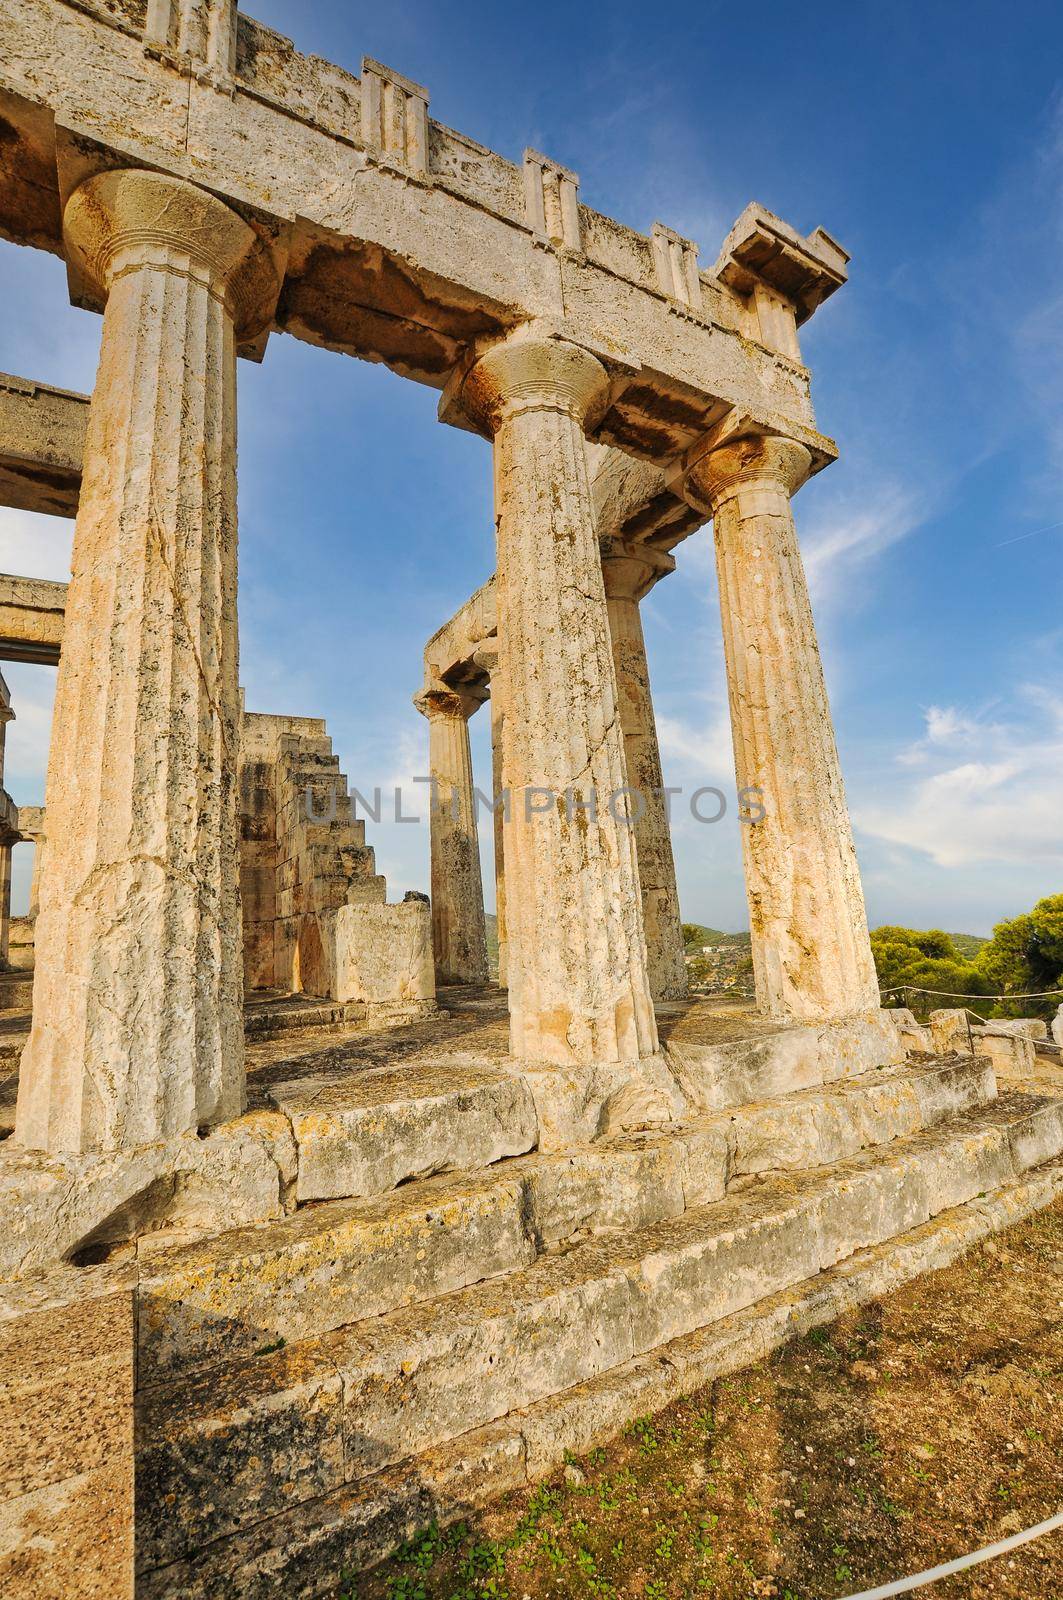 The Temple of Aphaia dedicated to the goddess Aphaia on the Greek island of Aigina by feelmytravel